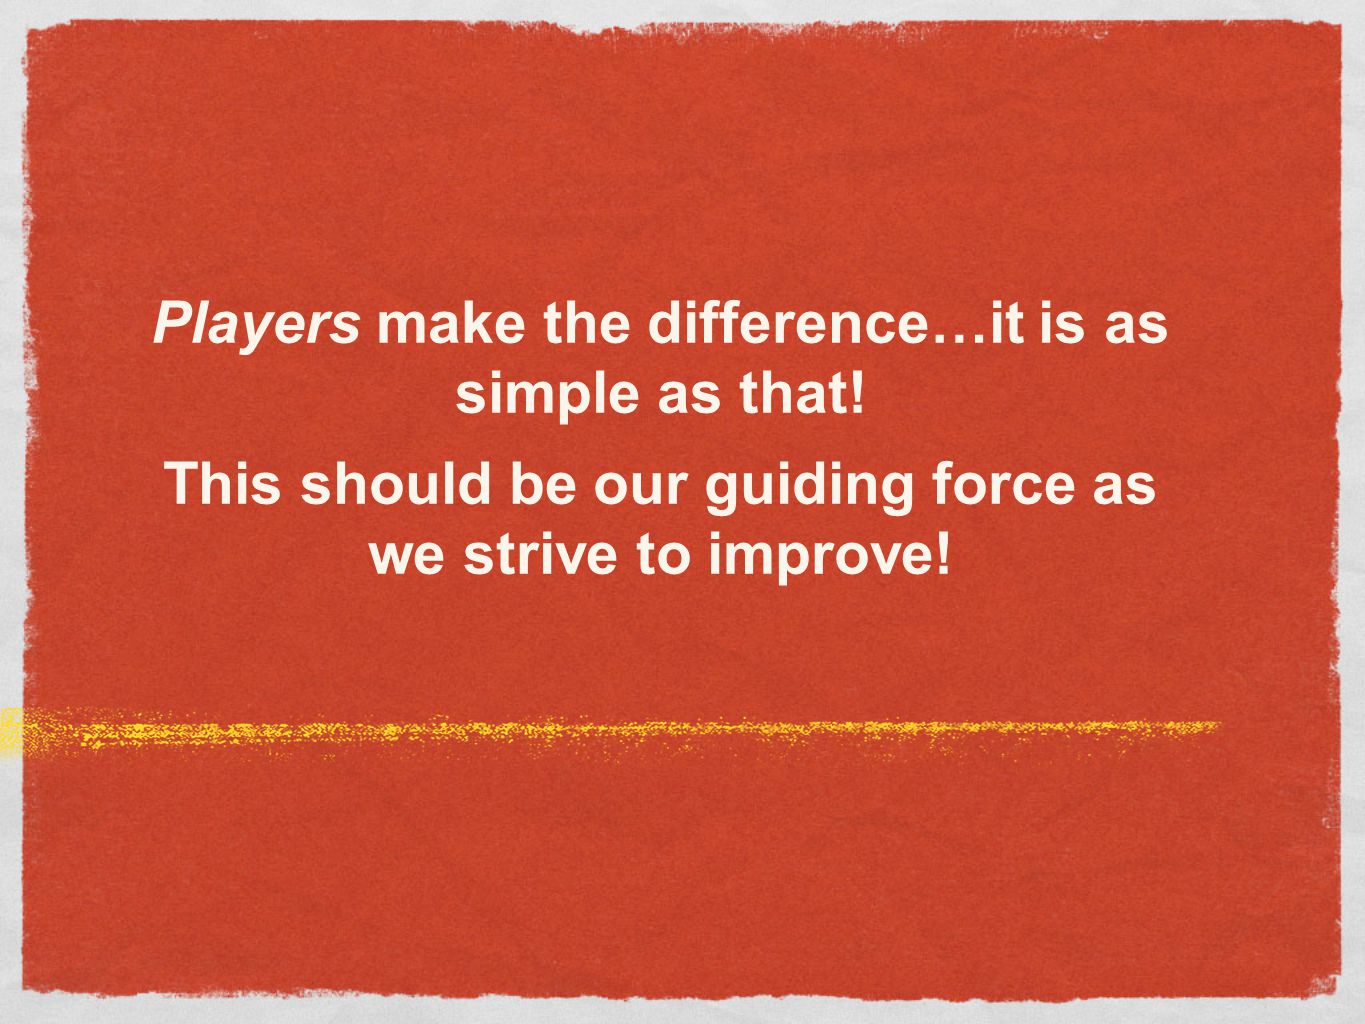 Players make the difference…it is as simple as that!